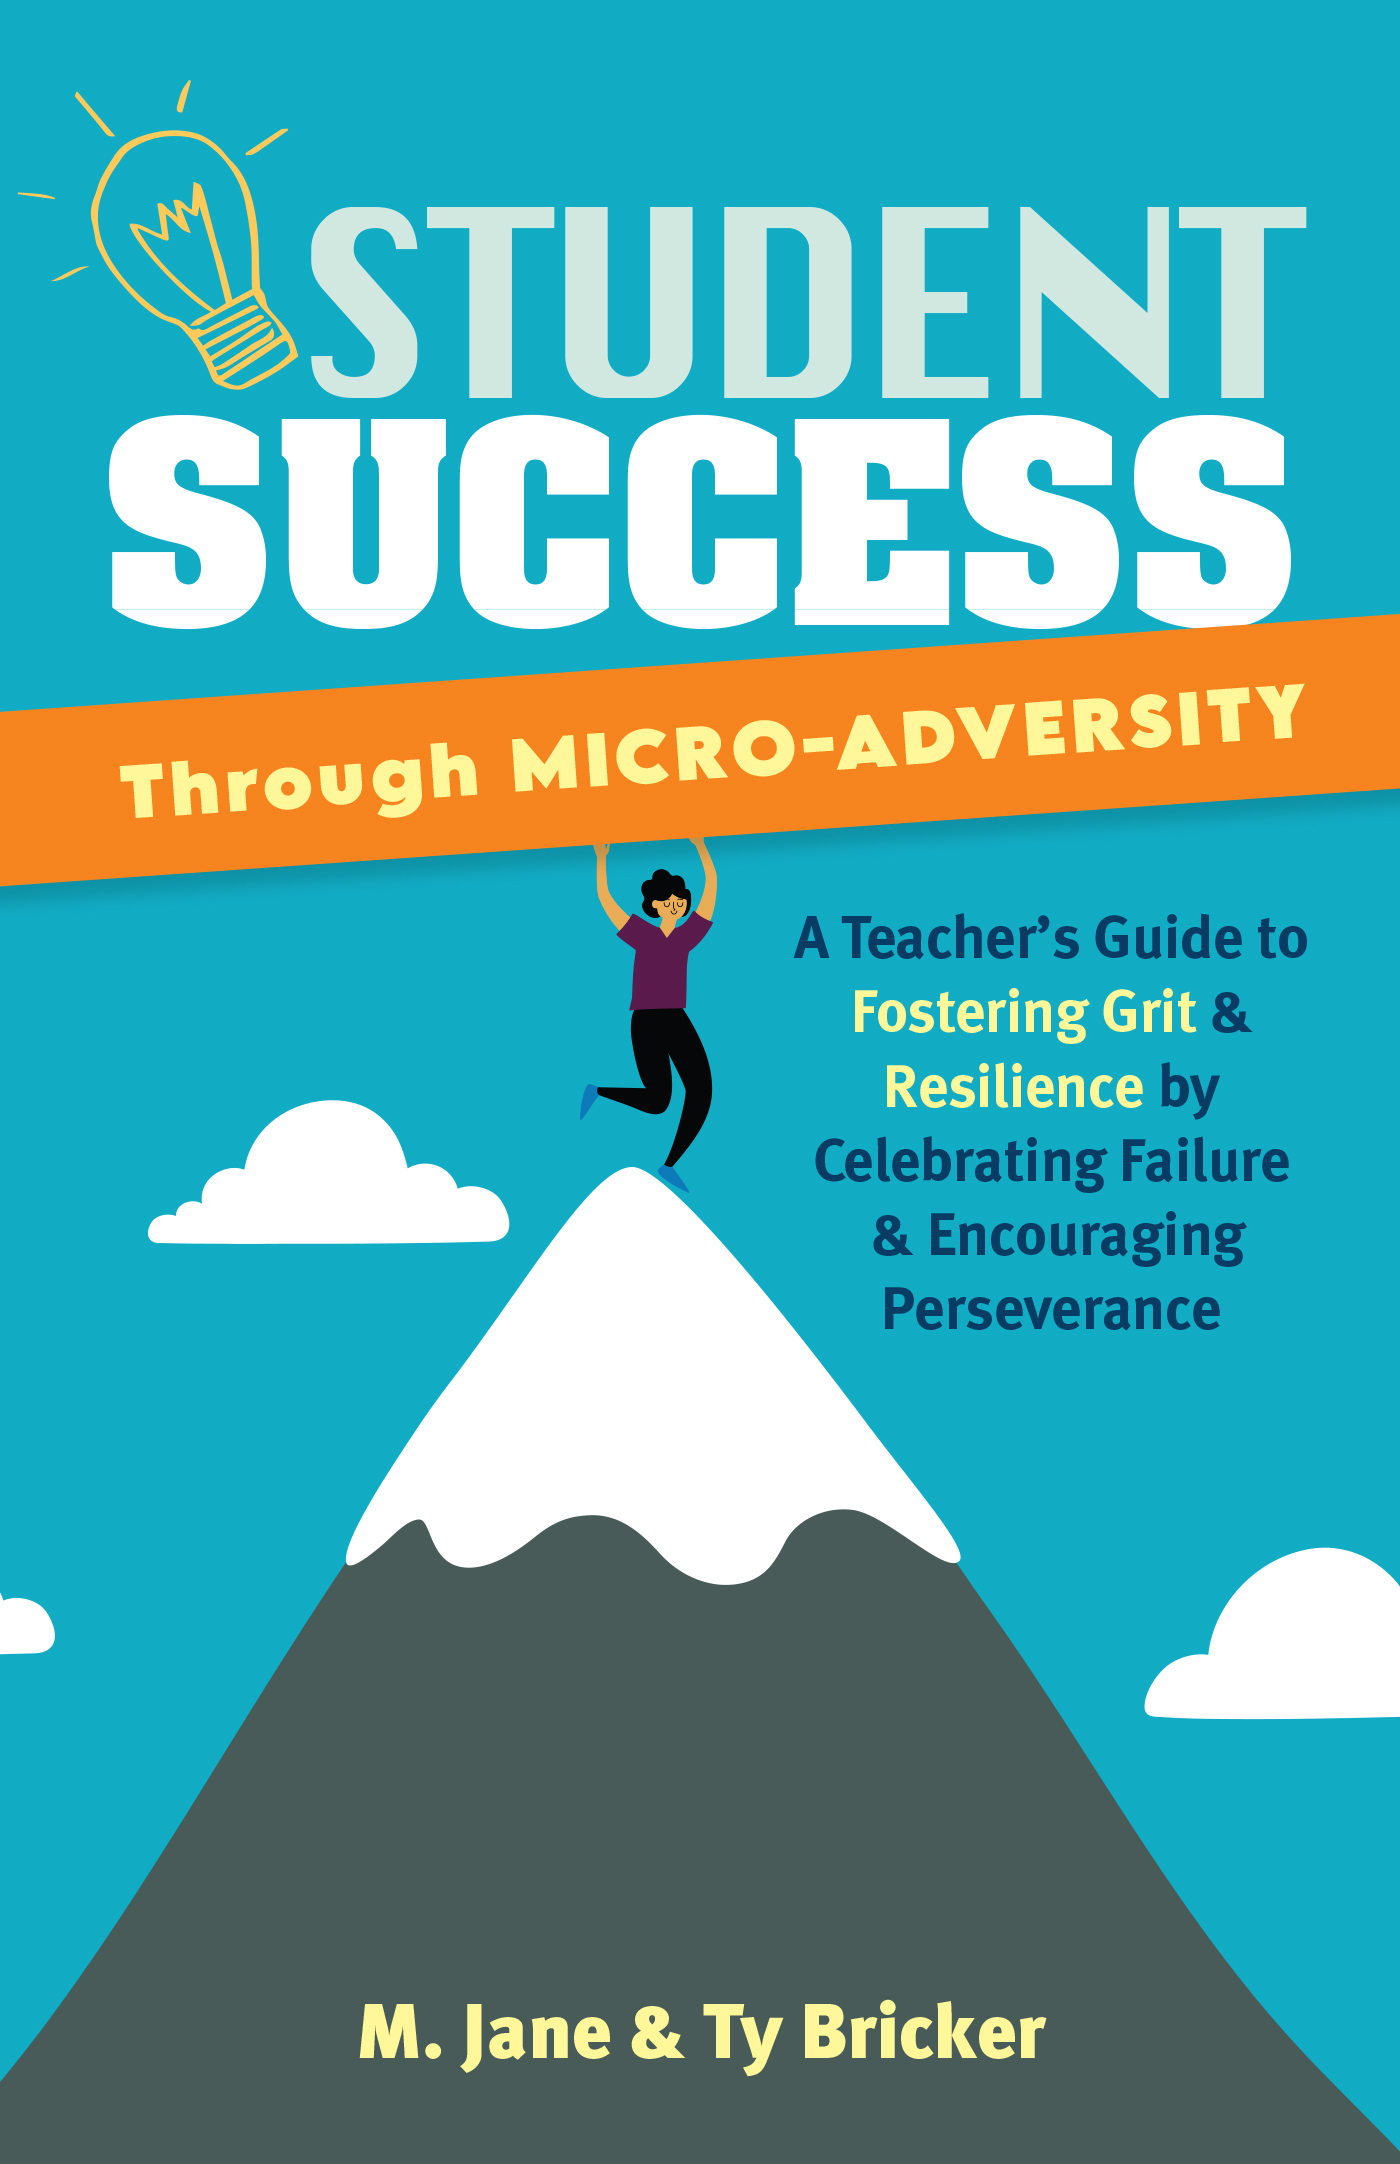 Student Success Through Micro-Adversity-front.indd